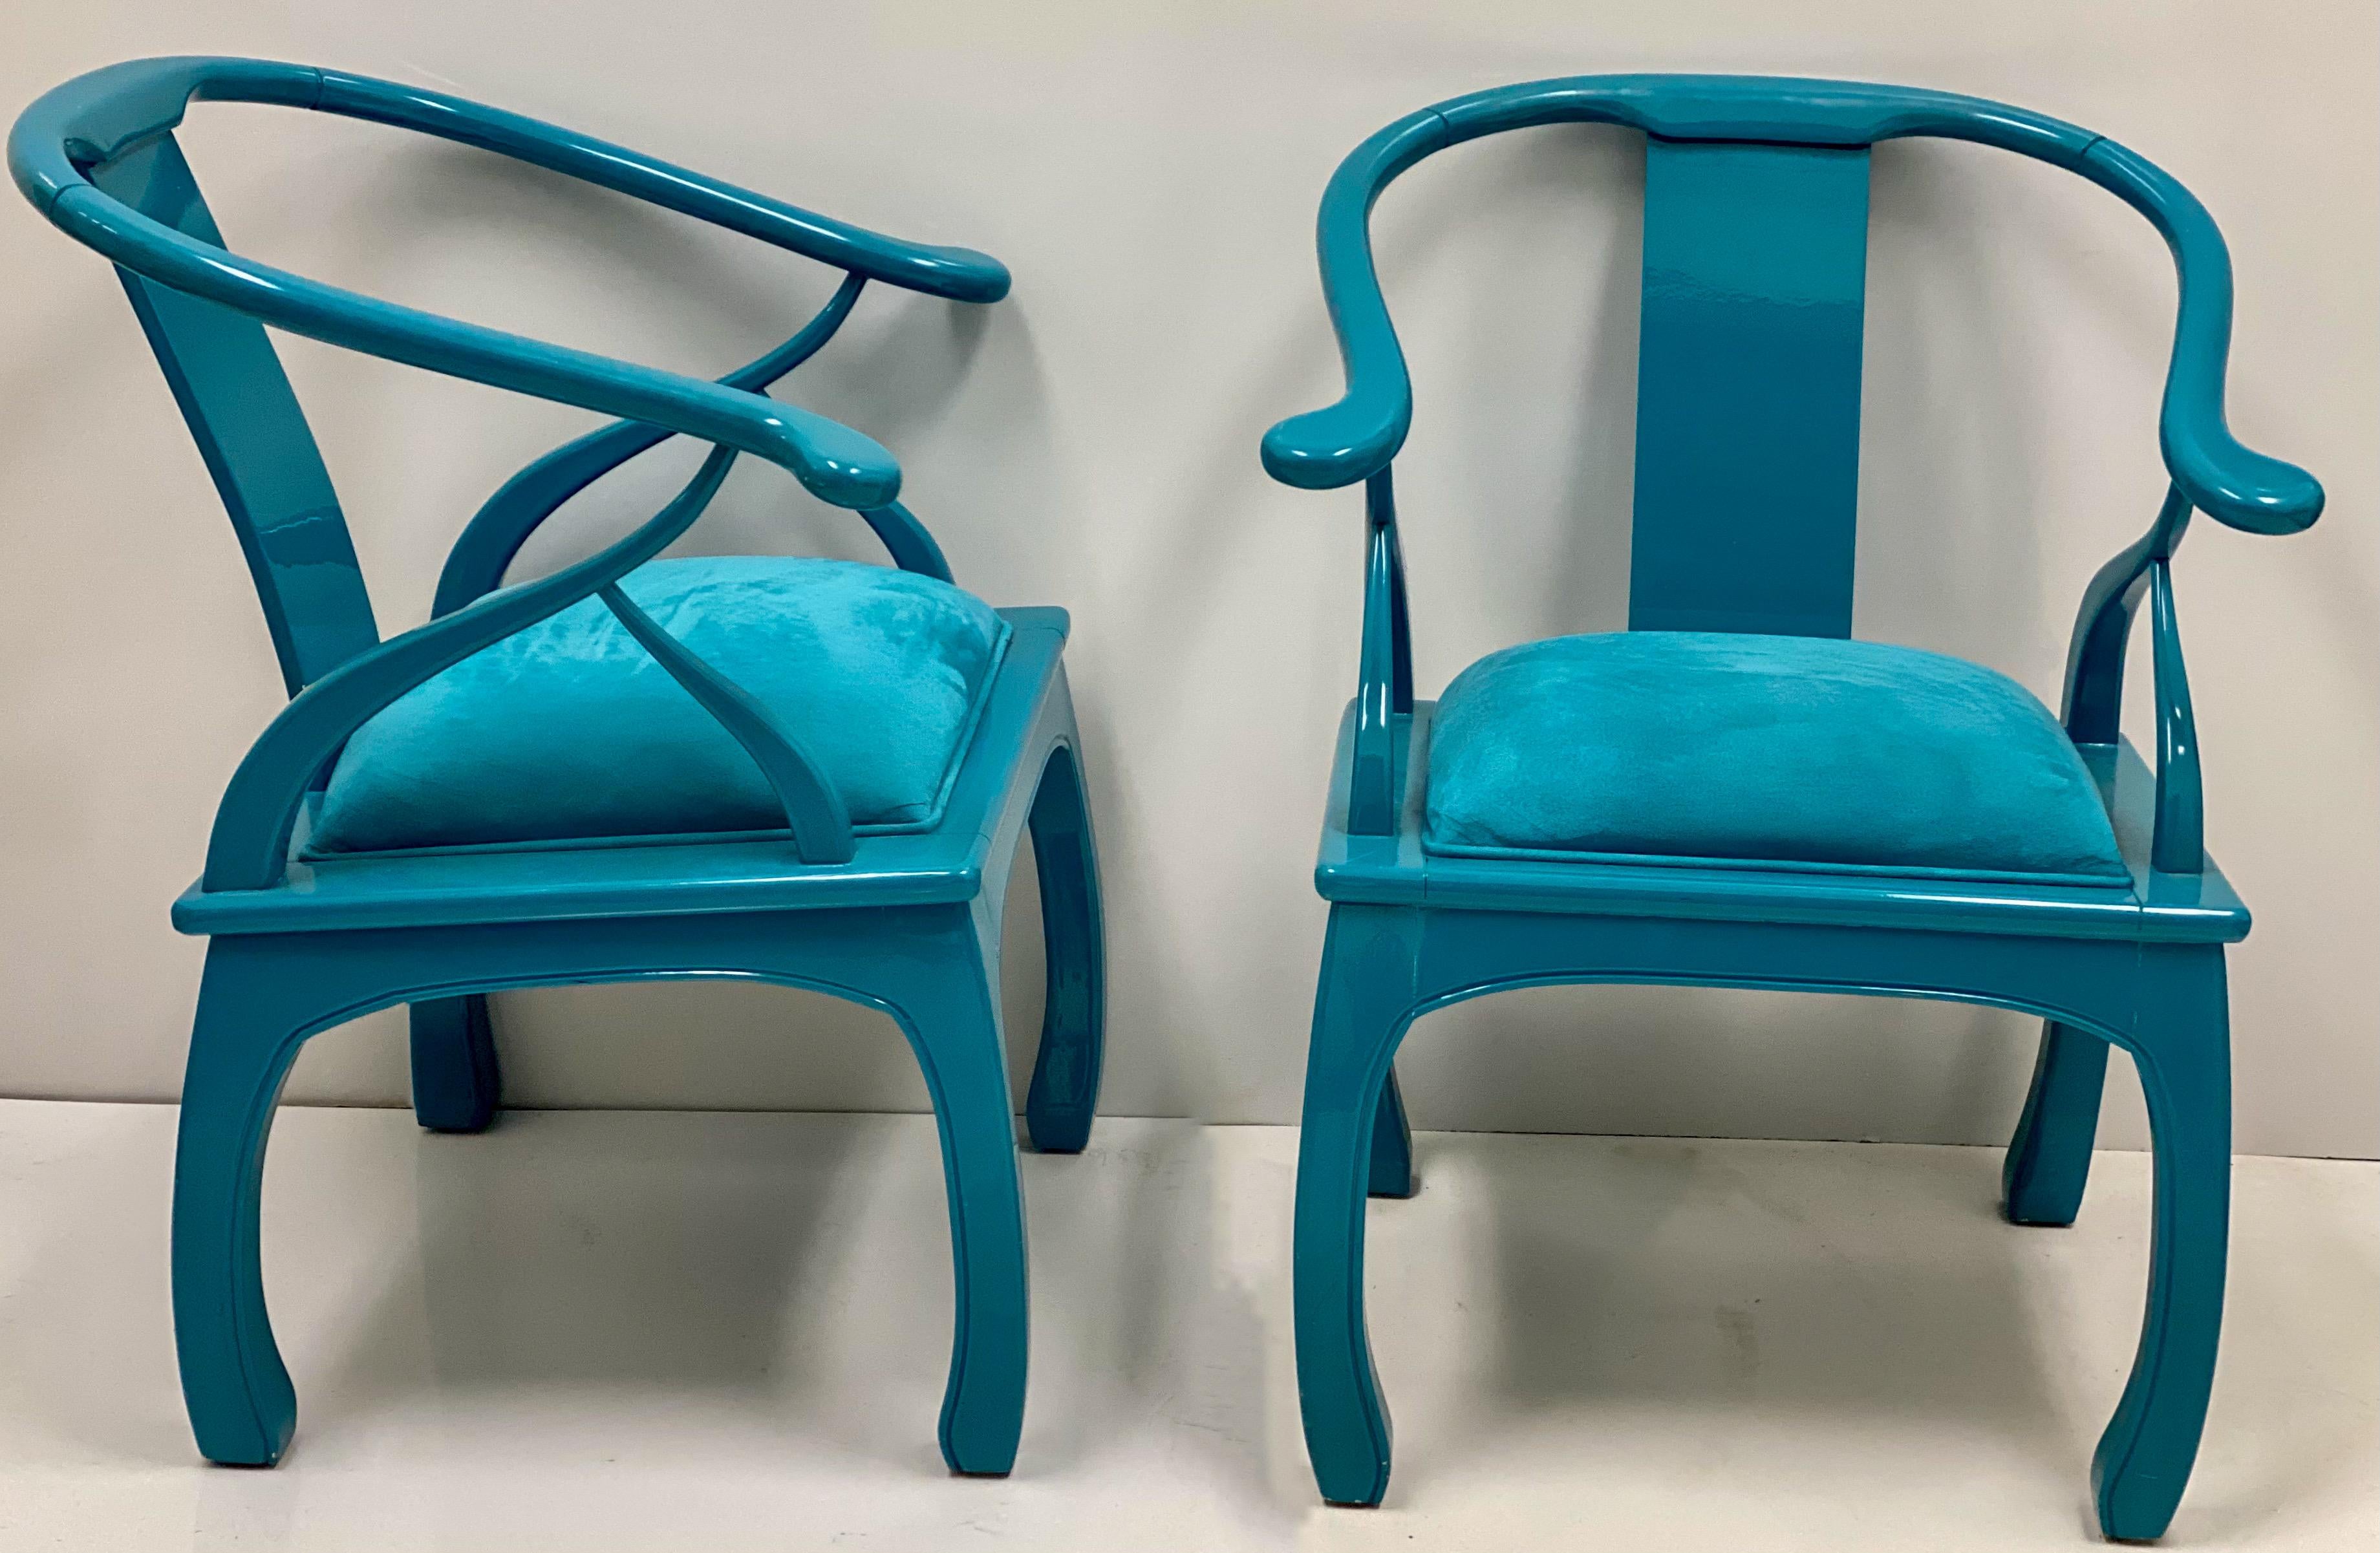 1960s Turquoise Lacquered Ming Style Chairs, a Pair In Good Condition For Sale In Kennesaw, GA